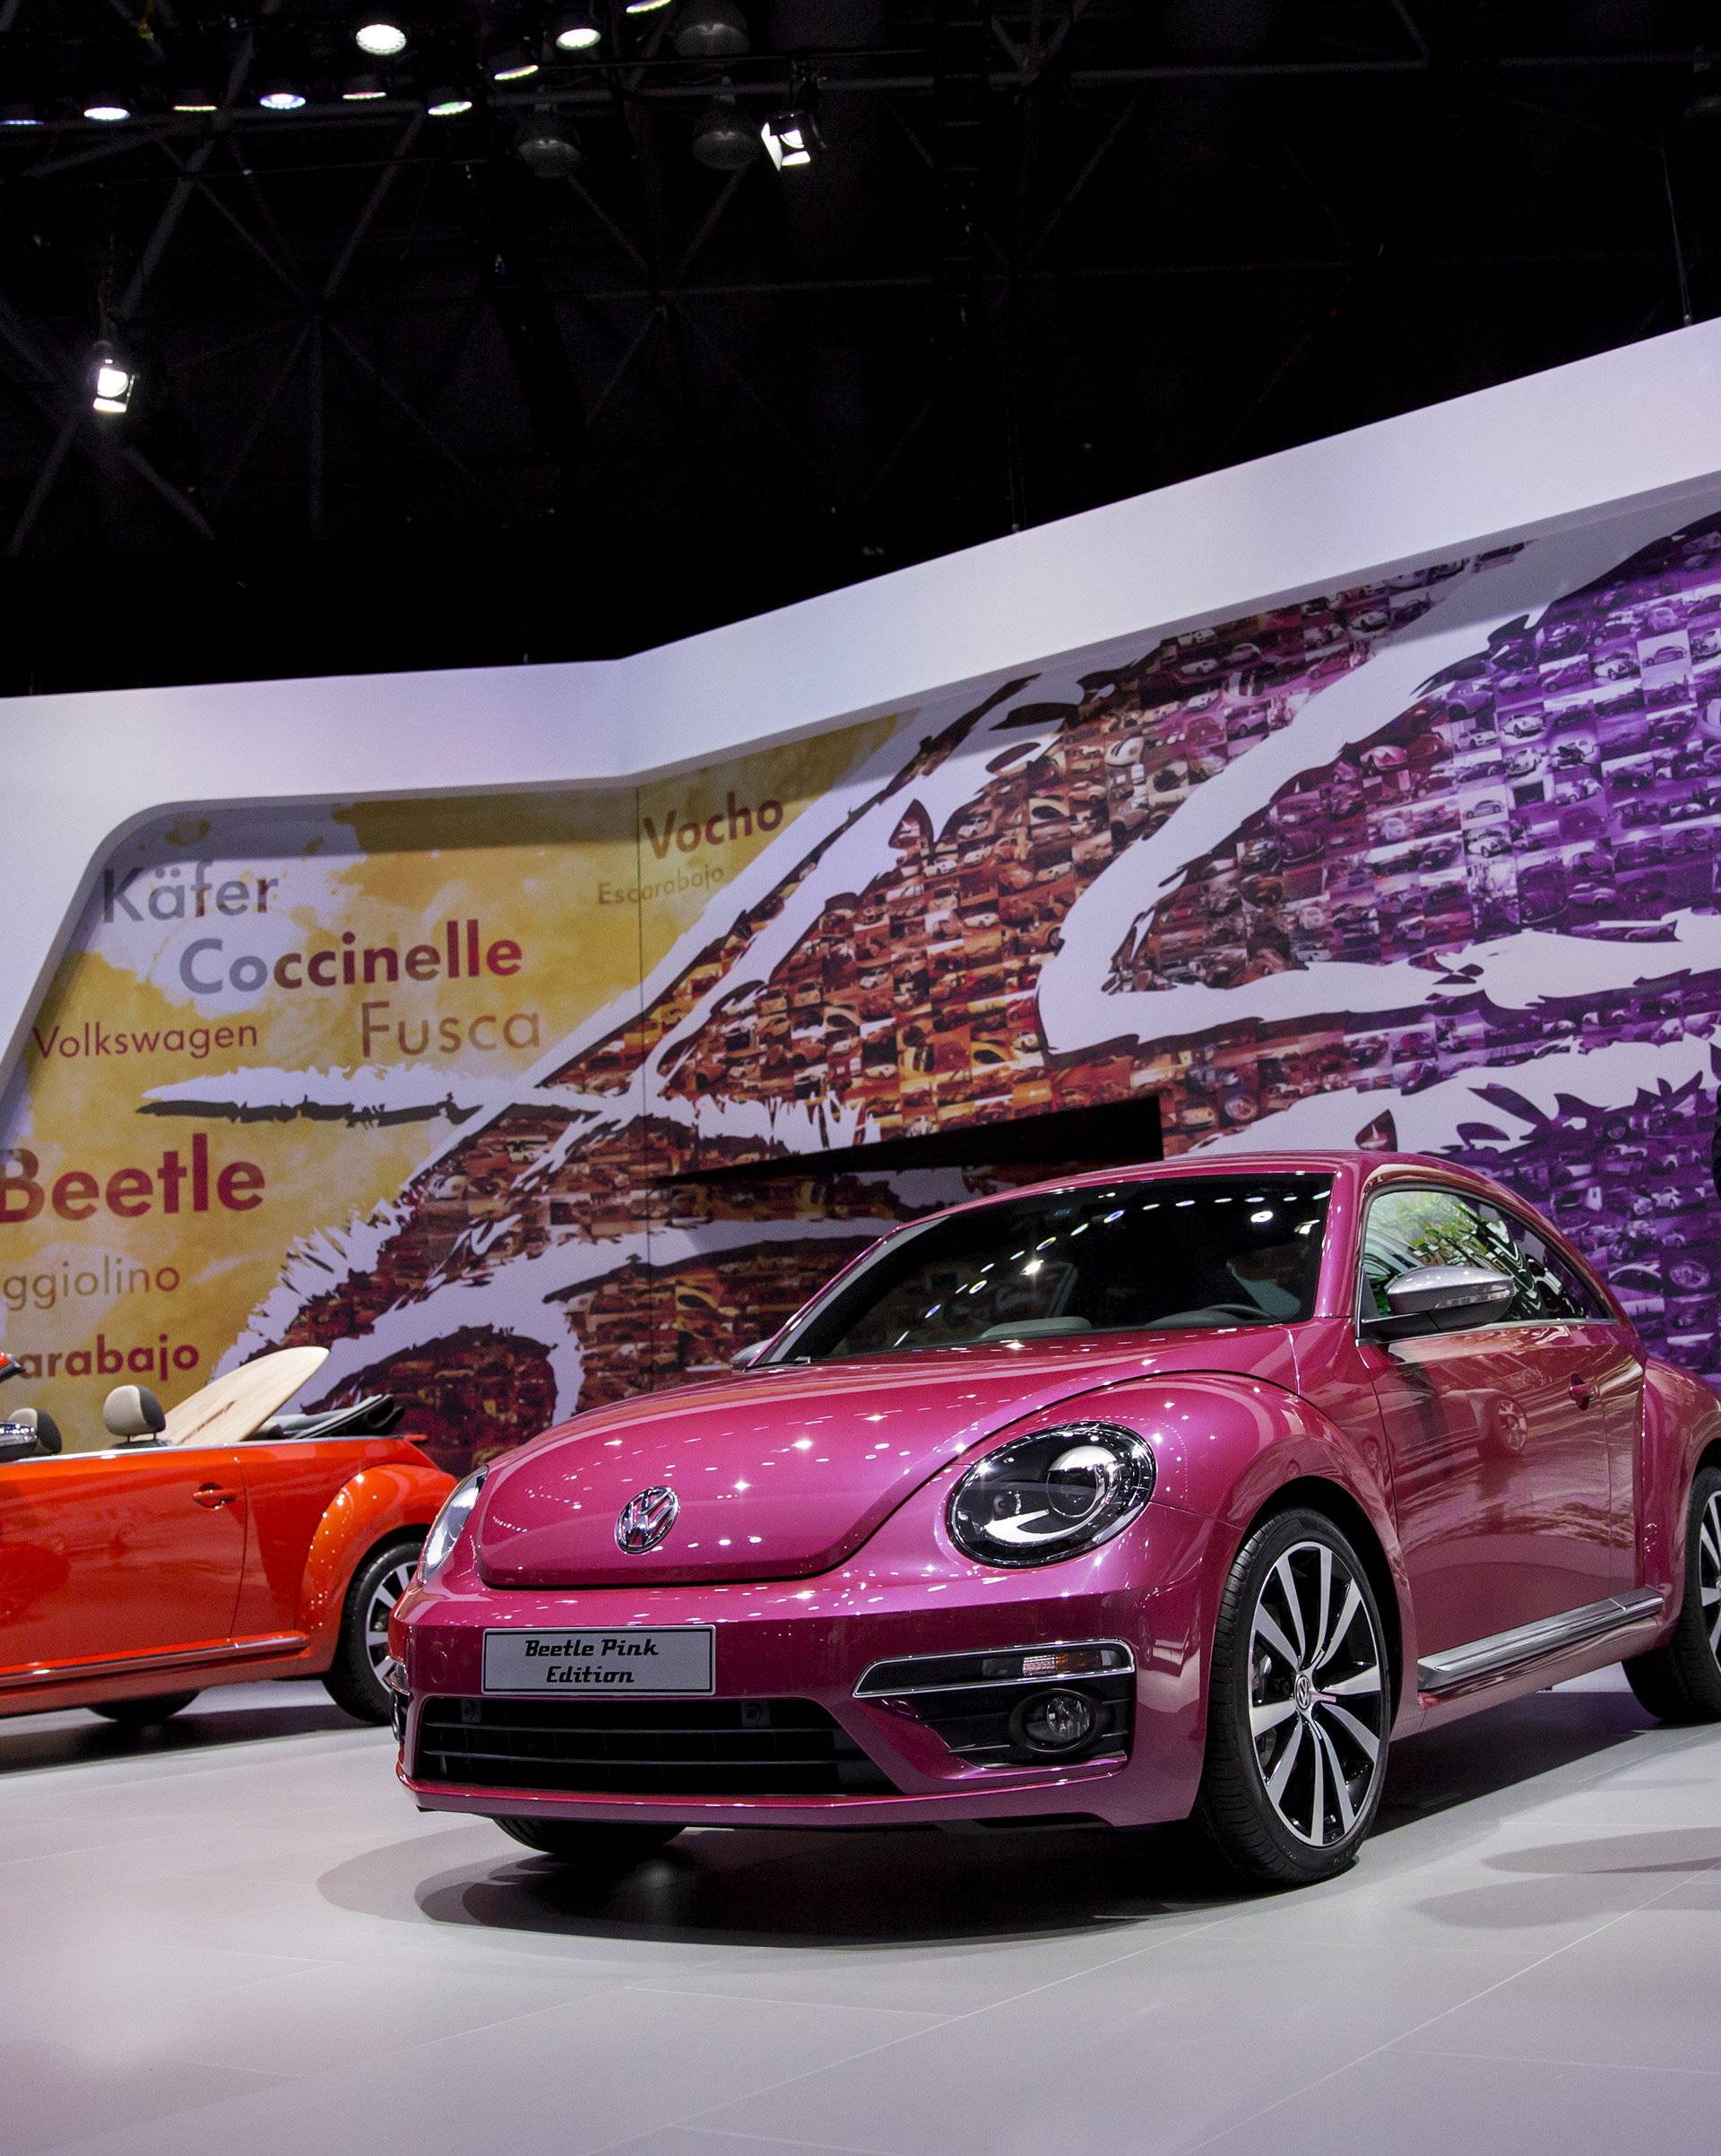 FILE PHOTO: Michael Horn president and CEO of Volkswagen Group of America unveils the new Beetle at the 2015 New York International Auto Show in New York City